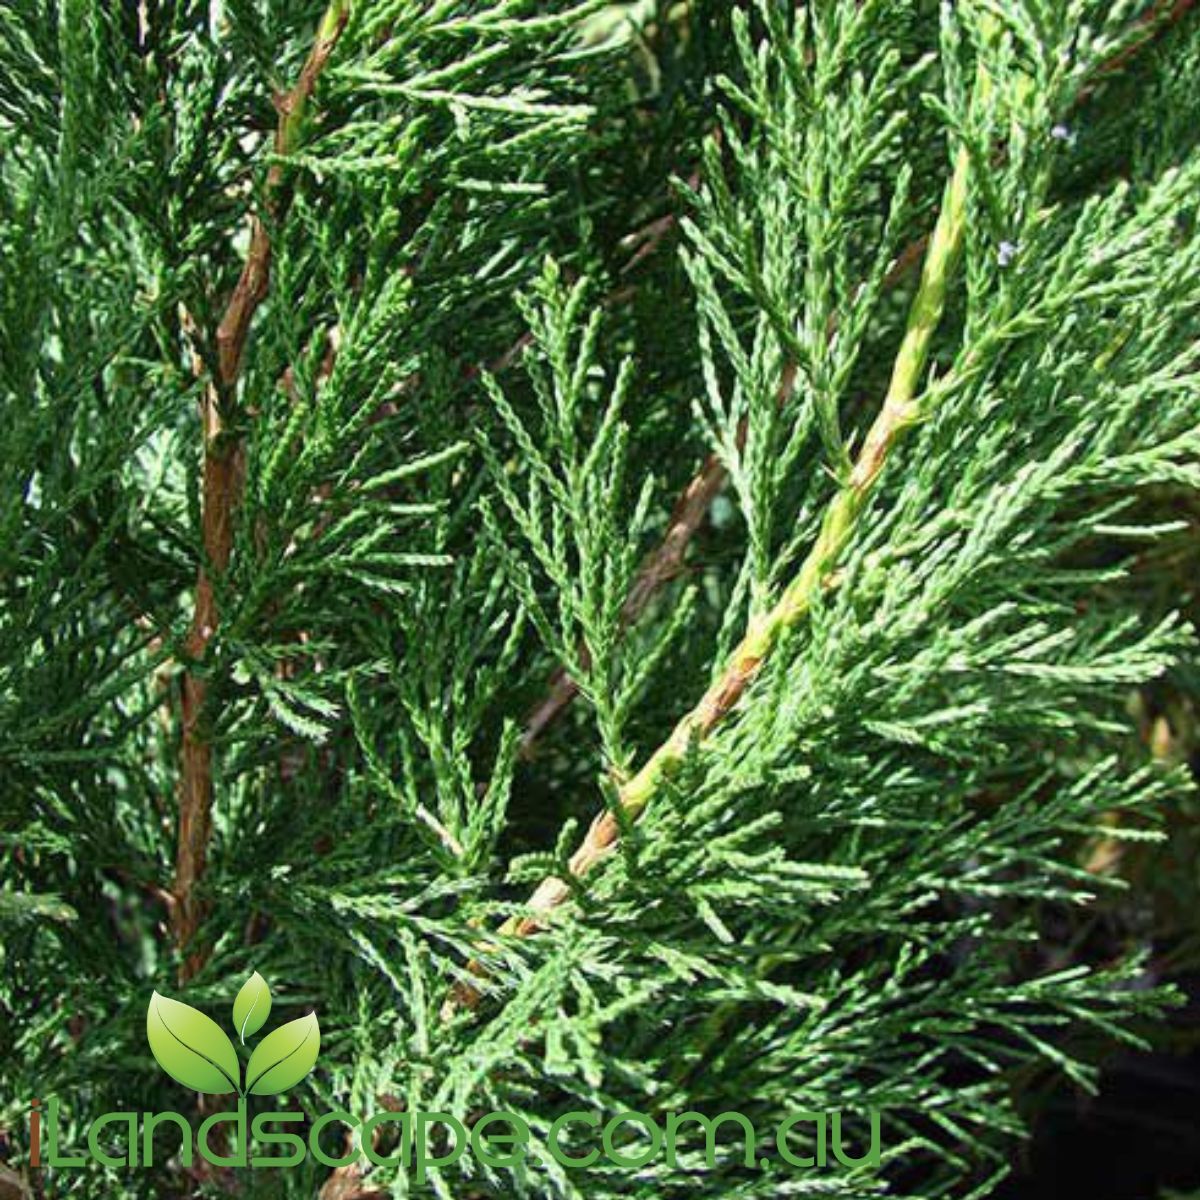 Juniperus spartan is one of the most perfect screening conifer plants. beautiful dark green evergreen foliage  Grows approx. 4-5m tall x 1.0m wide over a 10 year period  great plant for screening and also topiary in pots 